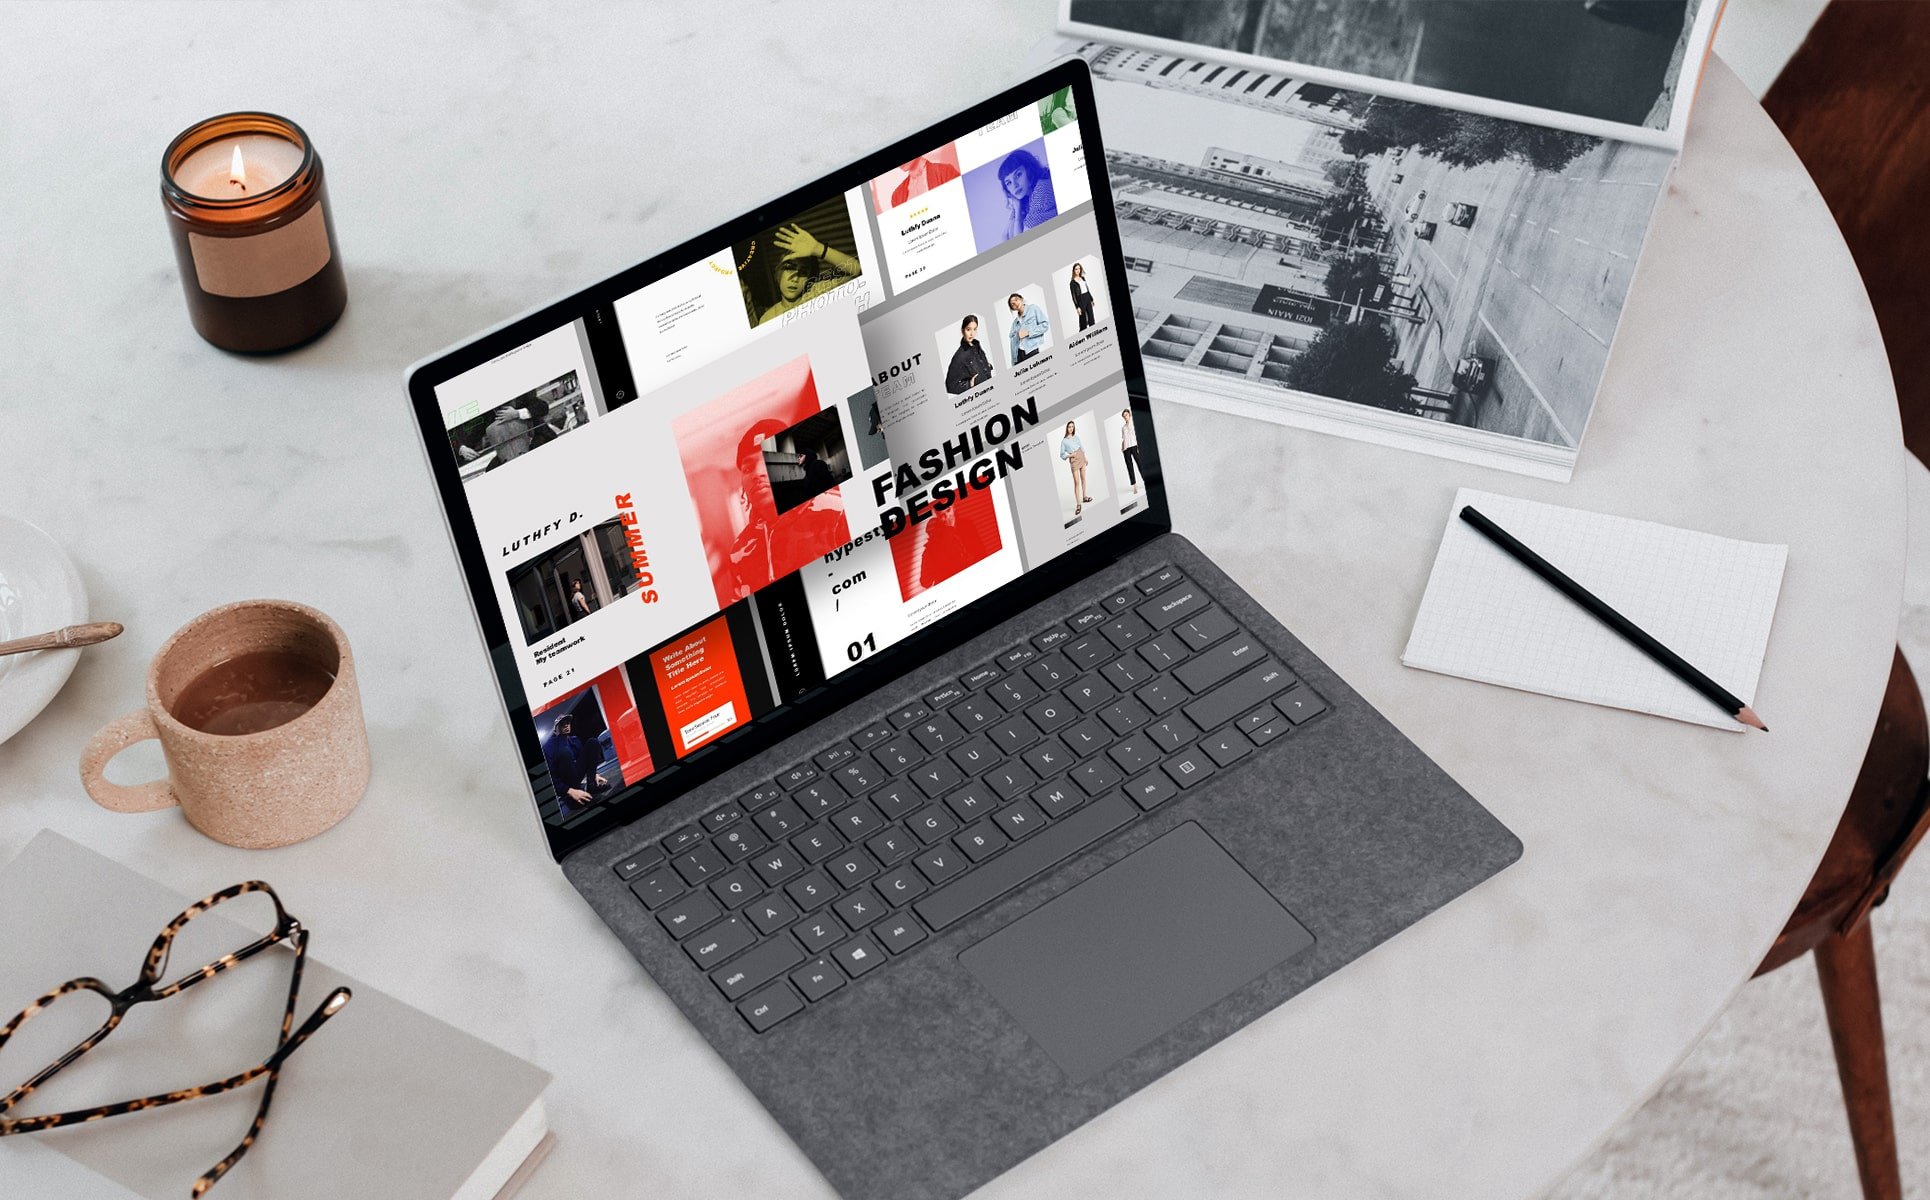 Laptop option of the Fashion Design Keynote Template.